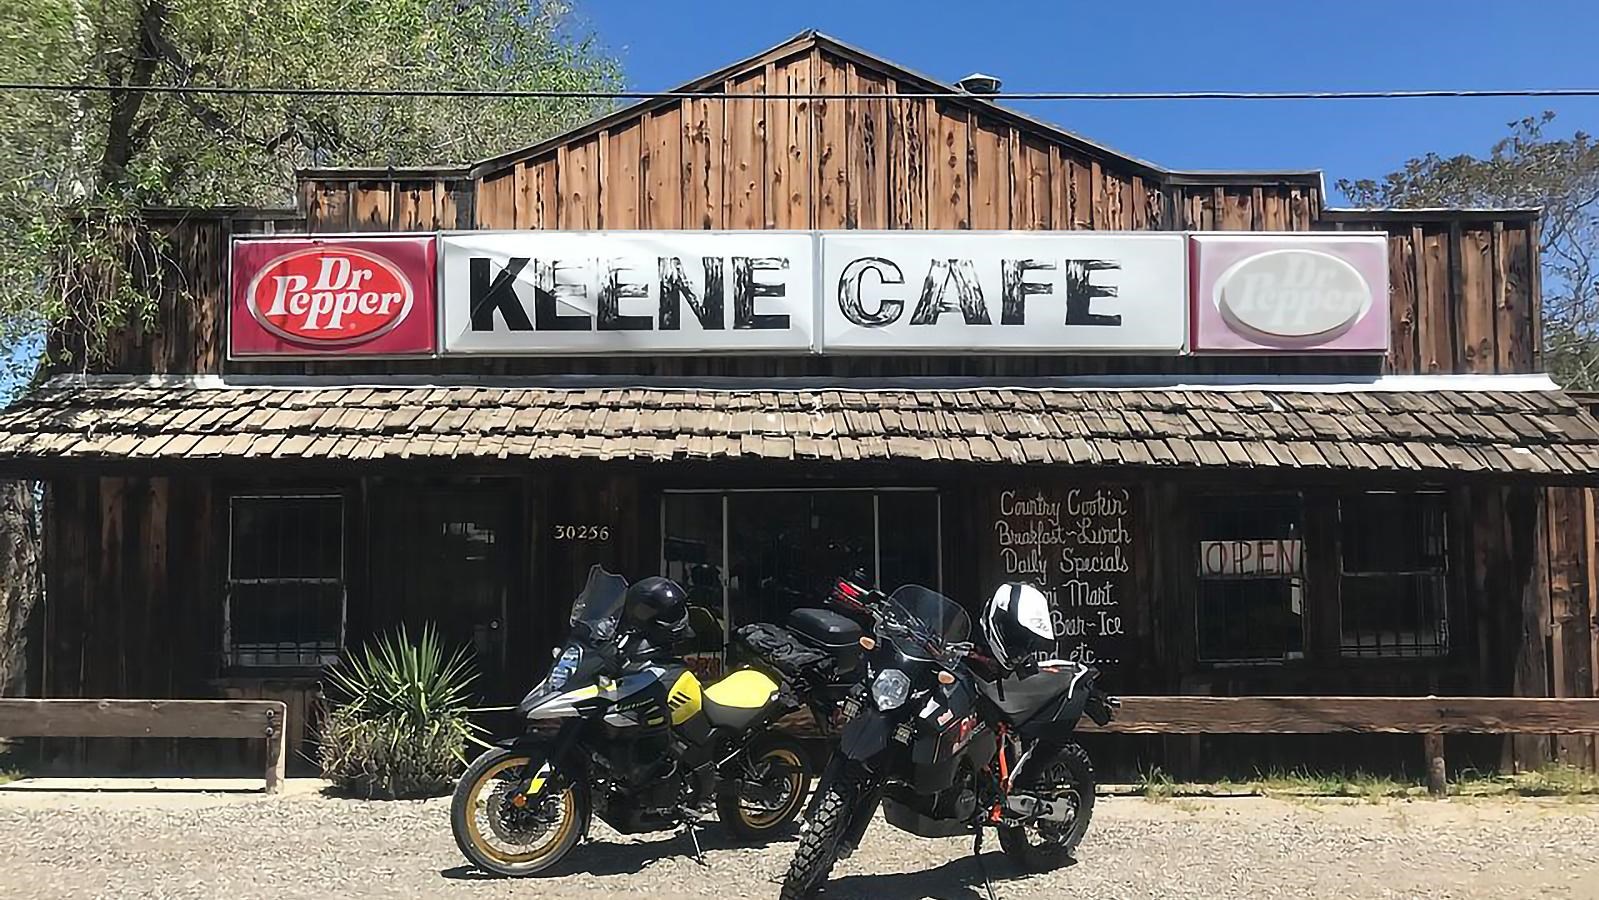 A wooden storefront with a large white signboard. Two motorcycles are parked in the foreground.